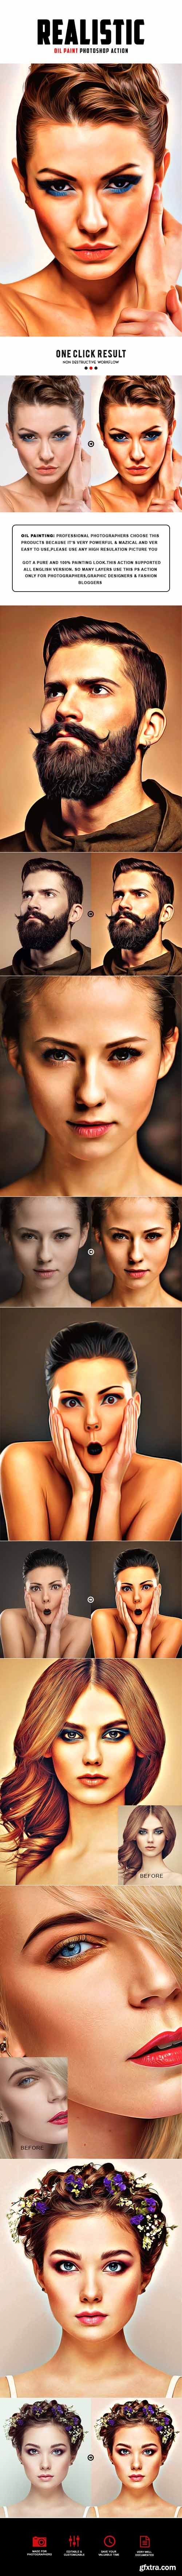 GR - Realistic Oil Painting Photoshop Action 19995363